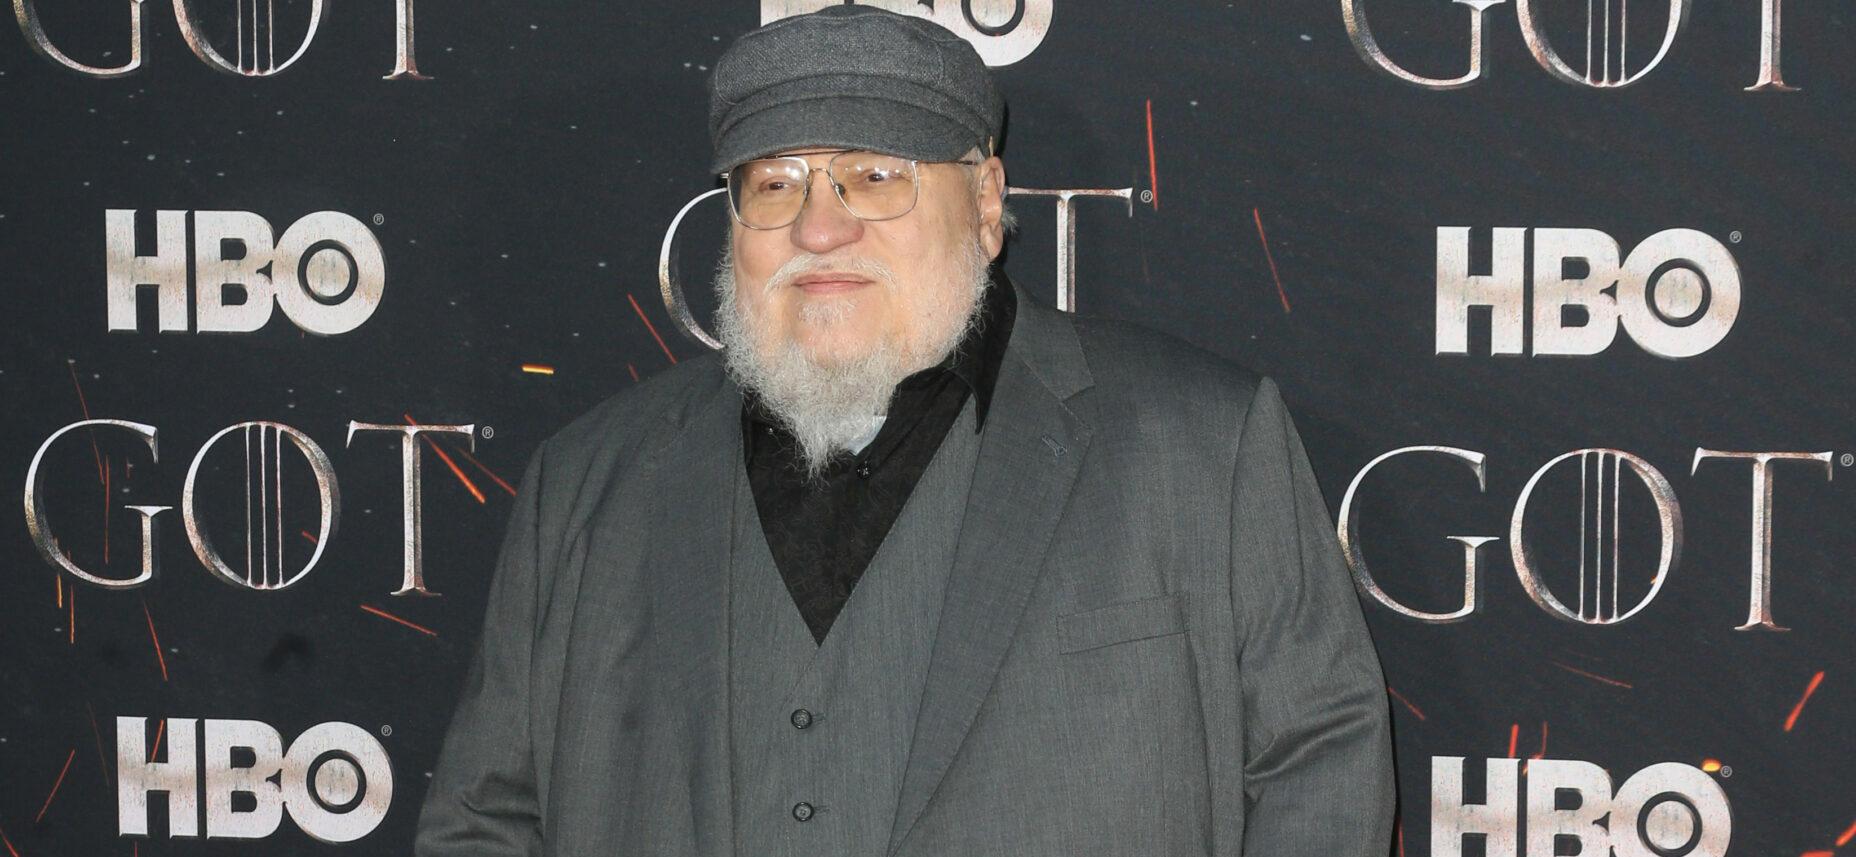 George R.R. Martin Shares Update On Planned ‘Game of Thrones’ Spinoffs